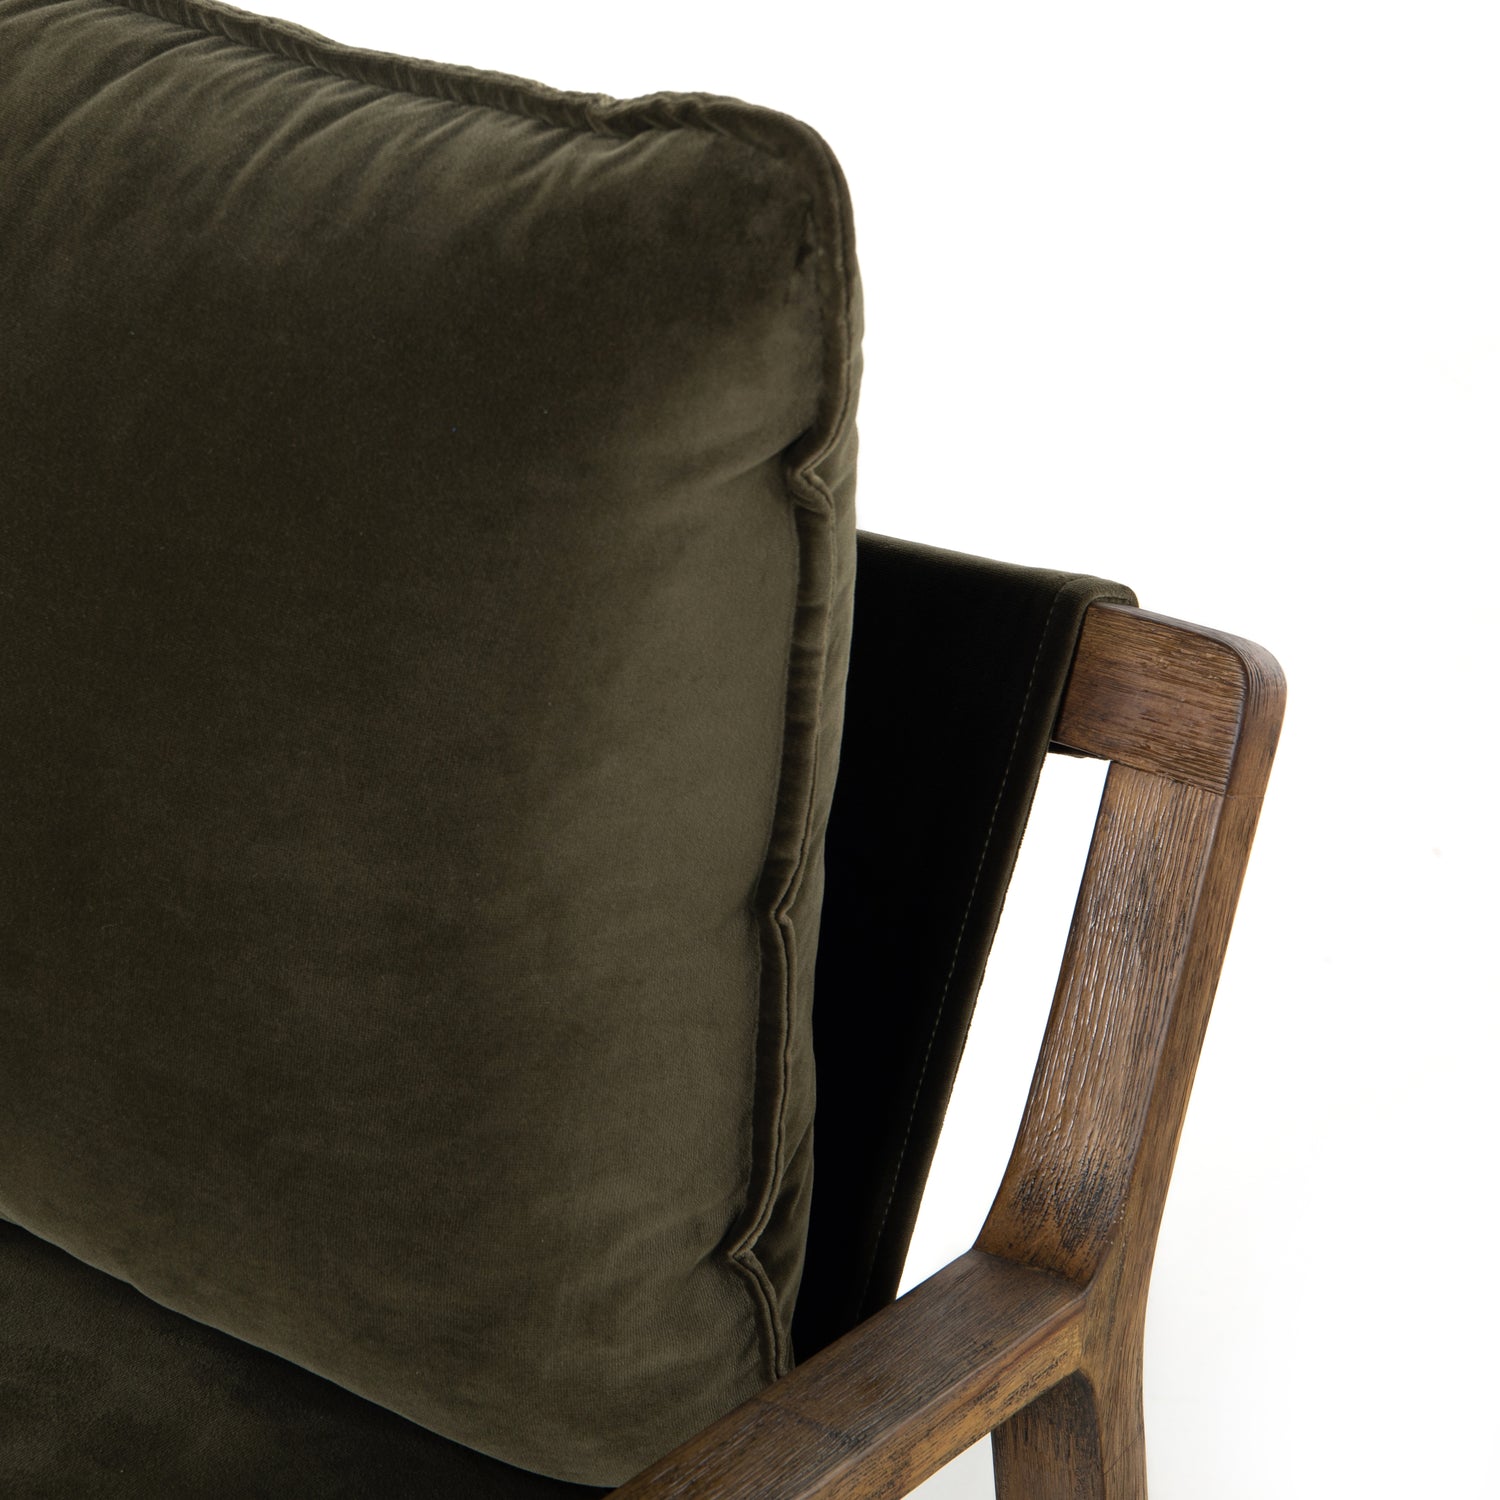 Surrey Olive Fabric with Toasted Umber Parawood | Ace Chair | Valley Ridge Furniture